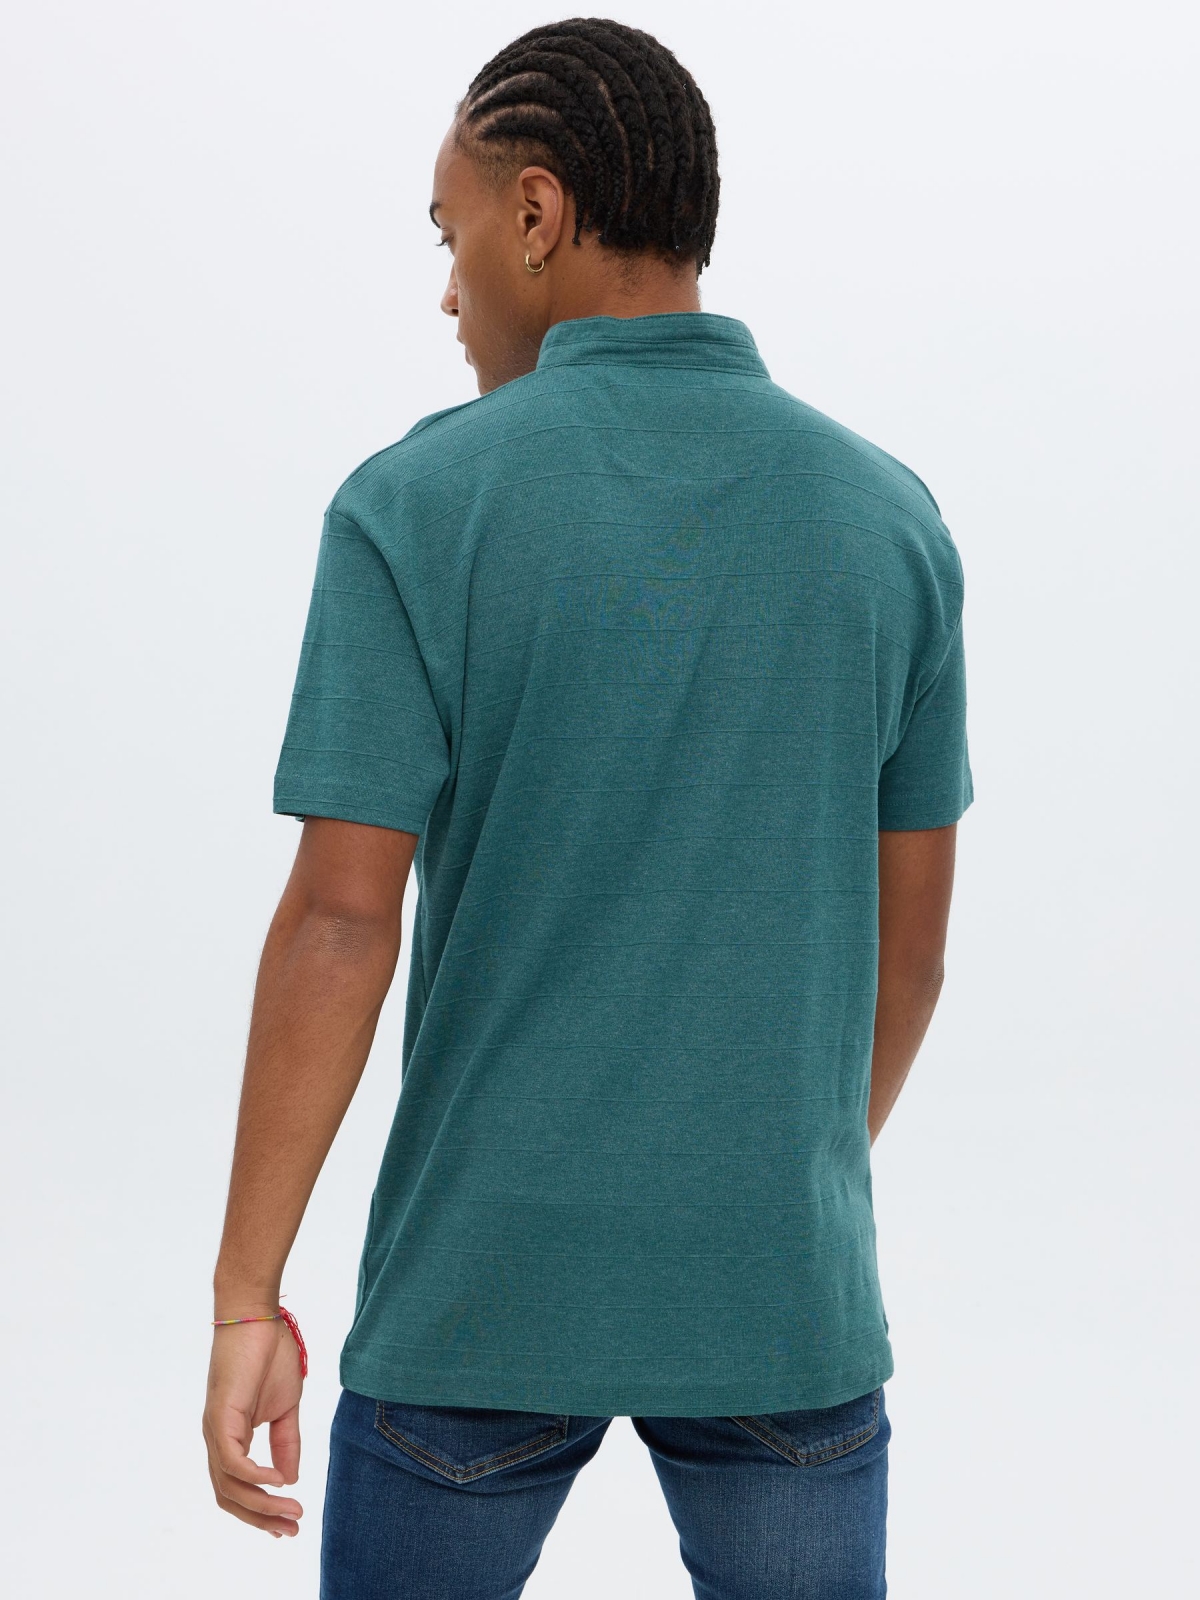 Mao collar textured polo shirt green middle back view